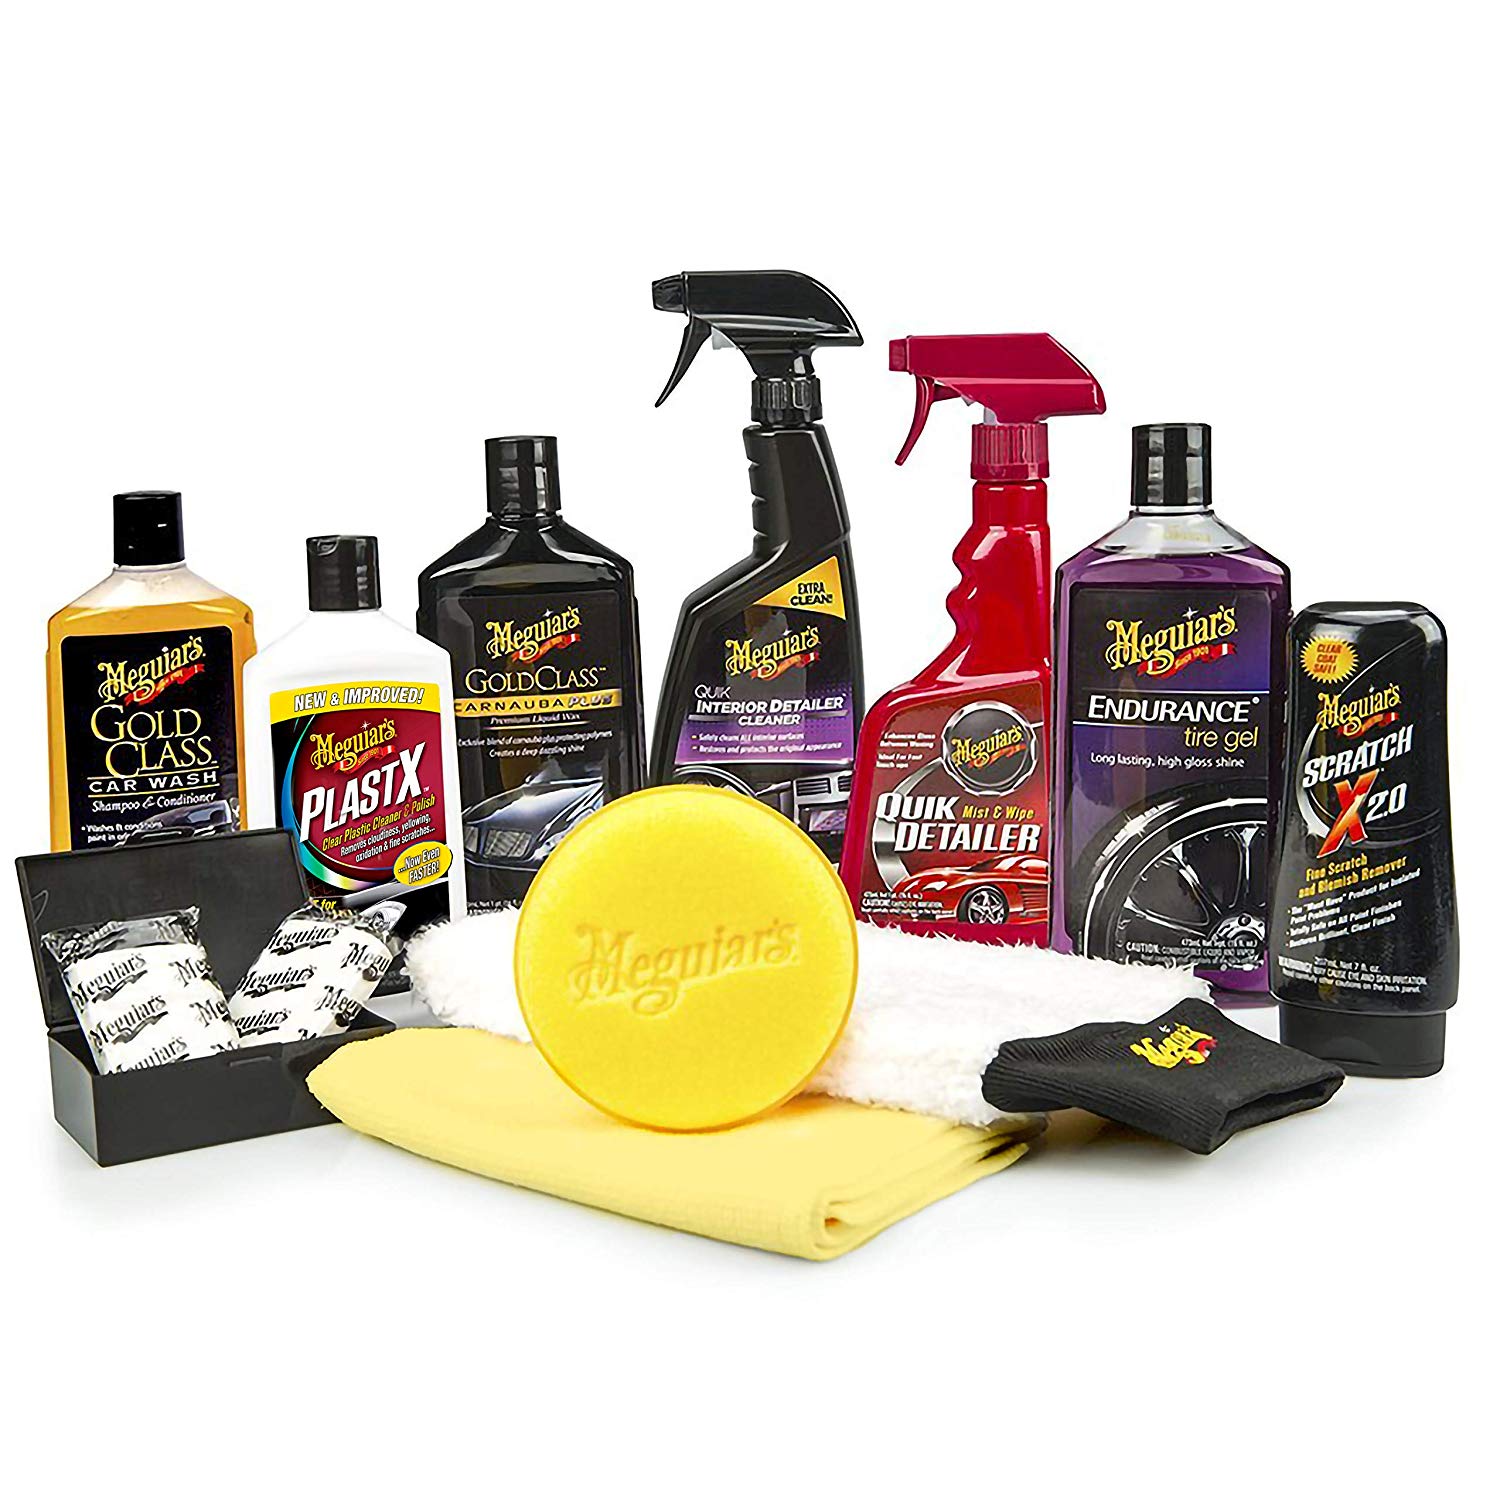 Retain The Value of Your Car with Proper Car Care Clean and Shine Your Entire Car The Essentials for Detailing by Hand Adam's Essentials Complete Car Detailing Upgraded Kit Protect 